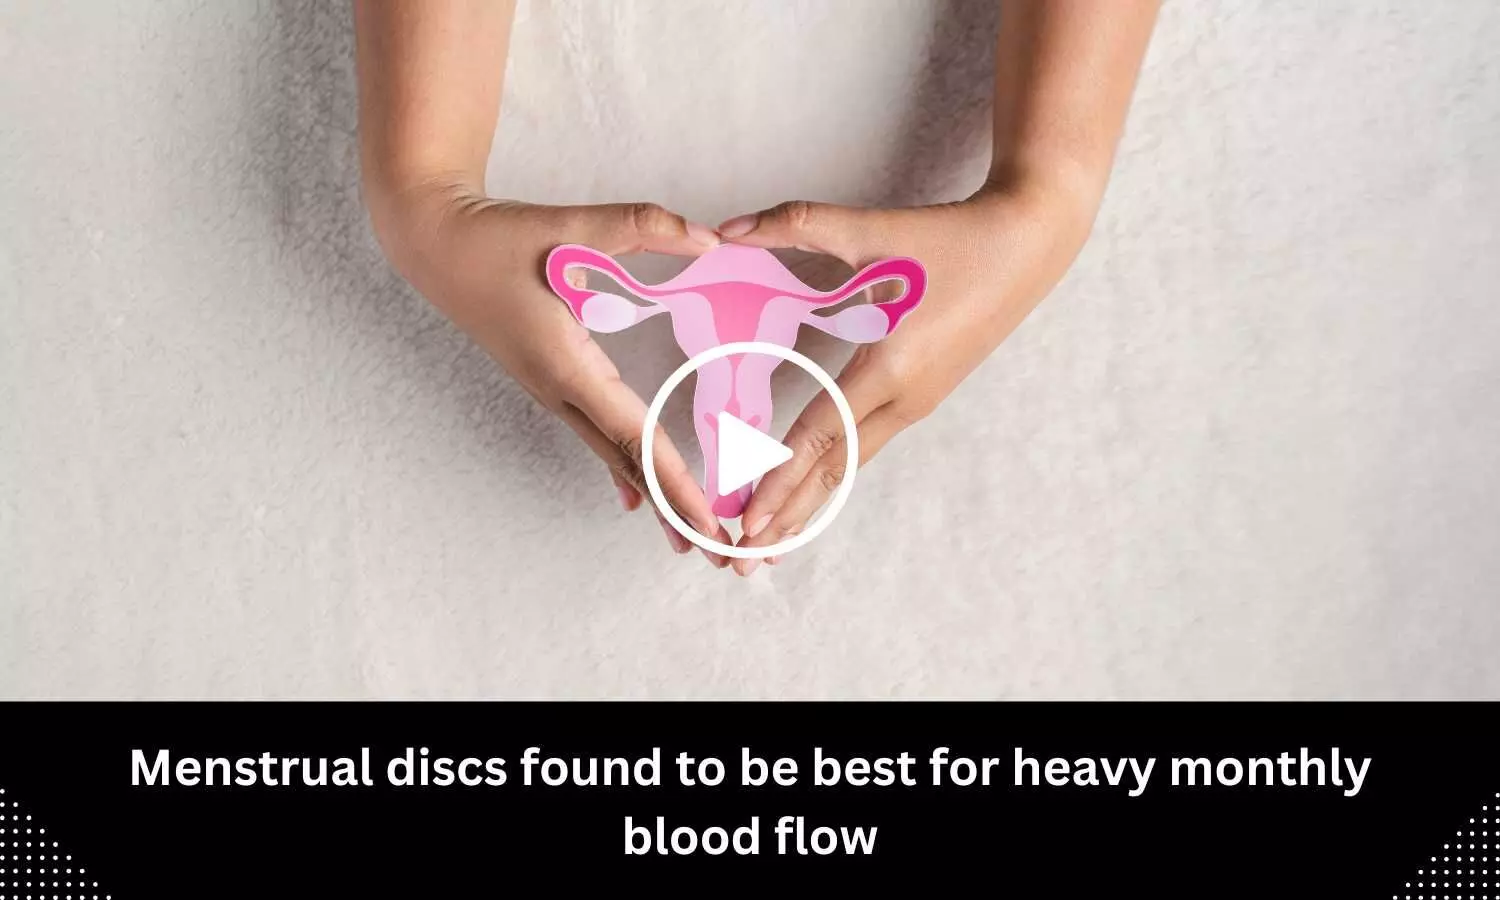 Menstrual discs found to be best for heavy monthly blood flow